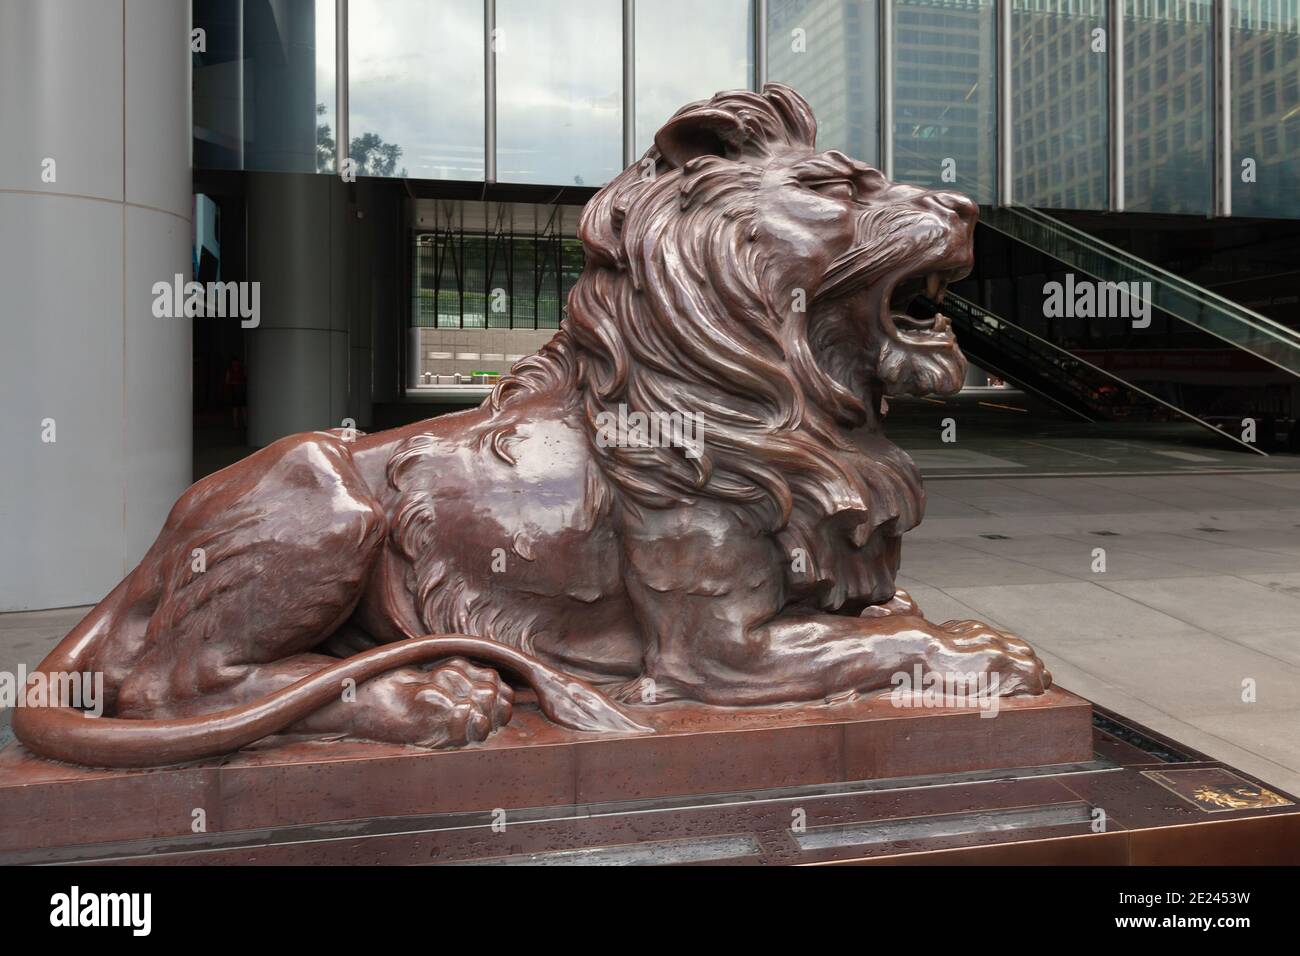 Hong Kong - July 15, 2017: Bronze lion statue at the entrance of HSBC bank Office in Hong Kong central district Stock Photo